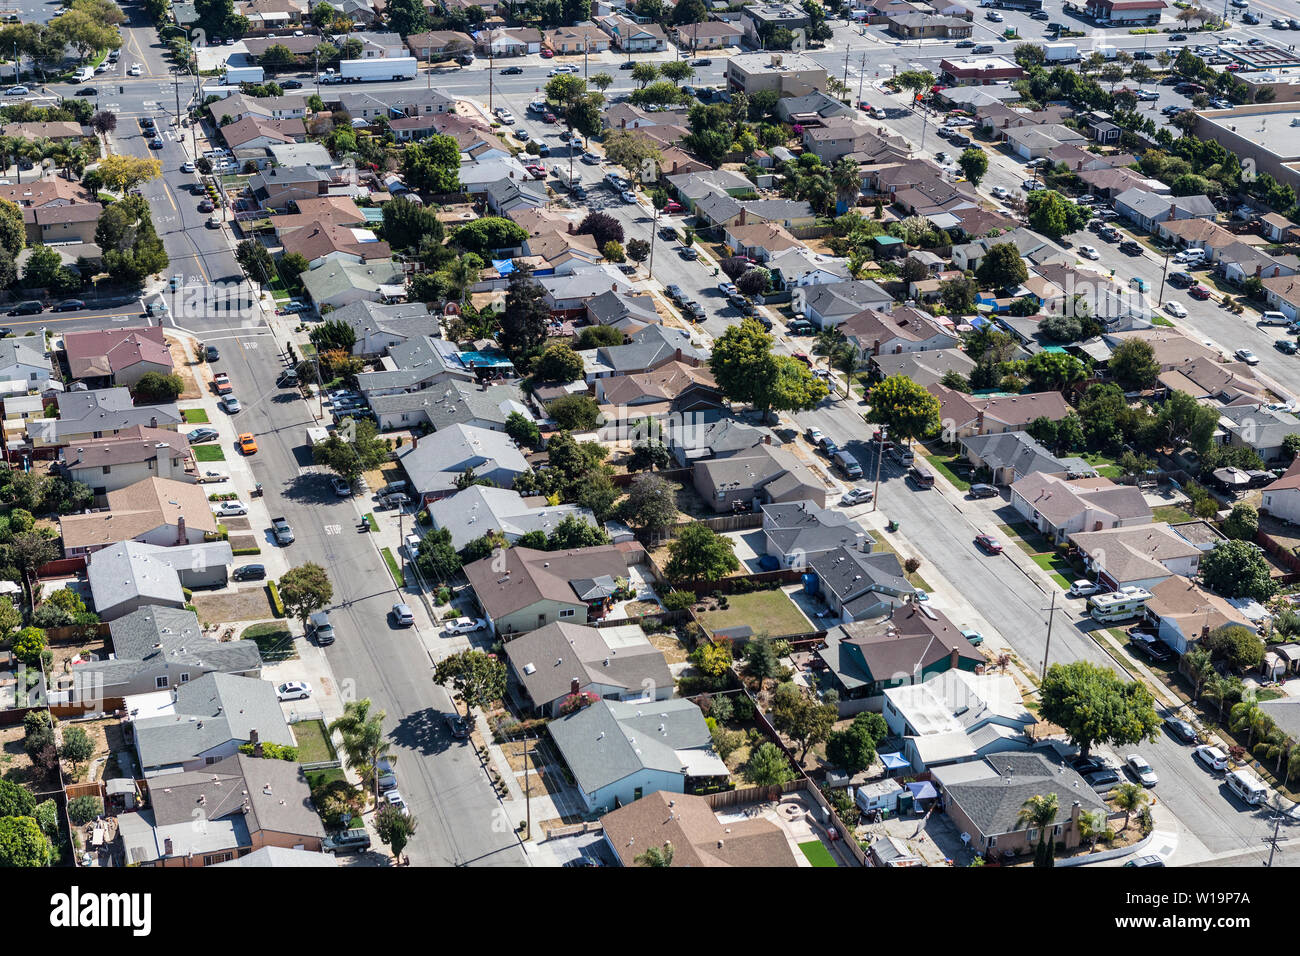 Aerial view of neighborhood streets and single family homes near Oakland California. Stock Photo